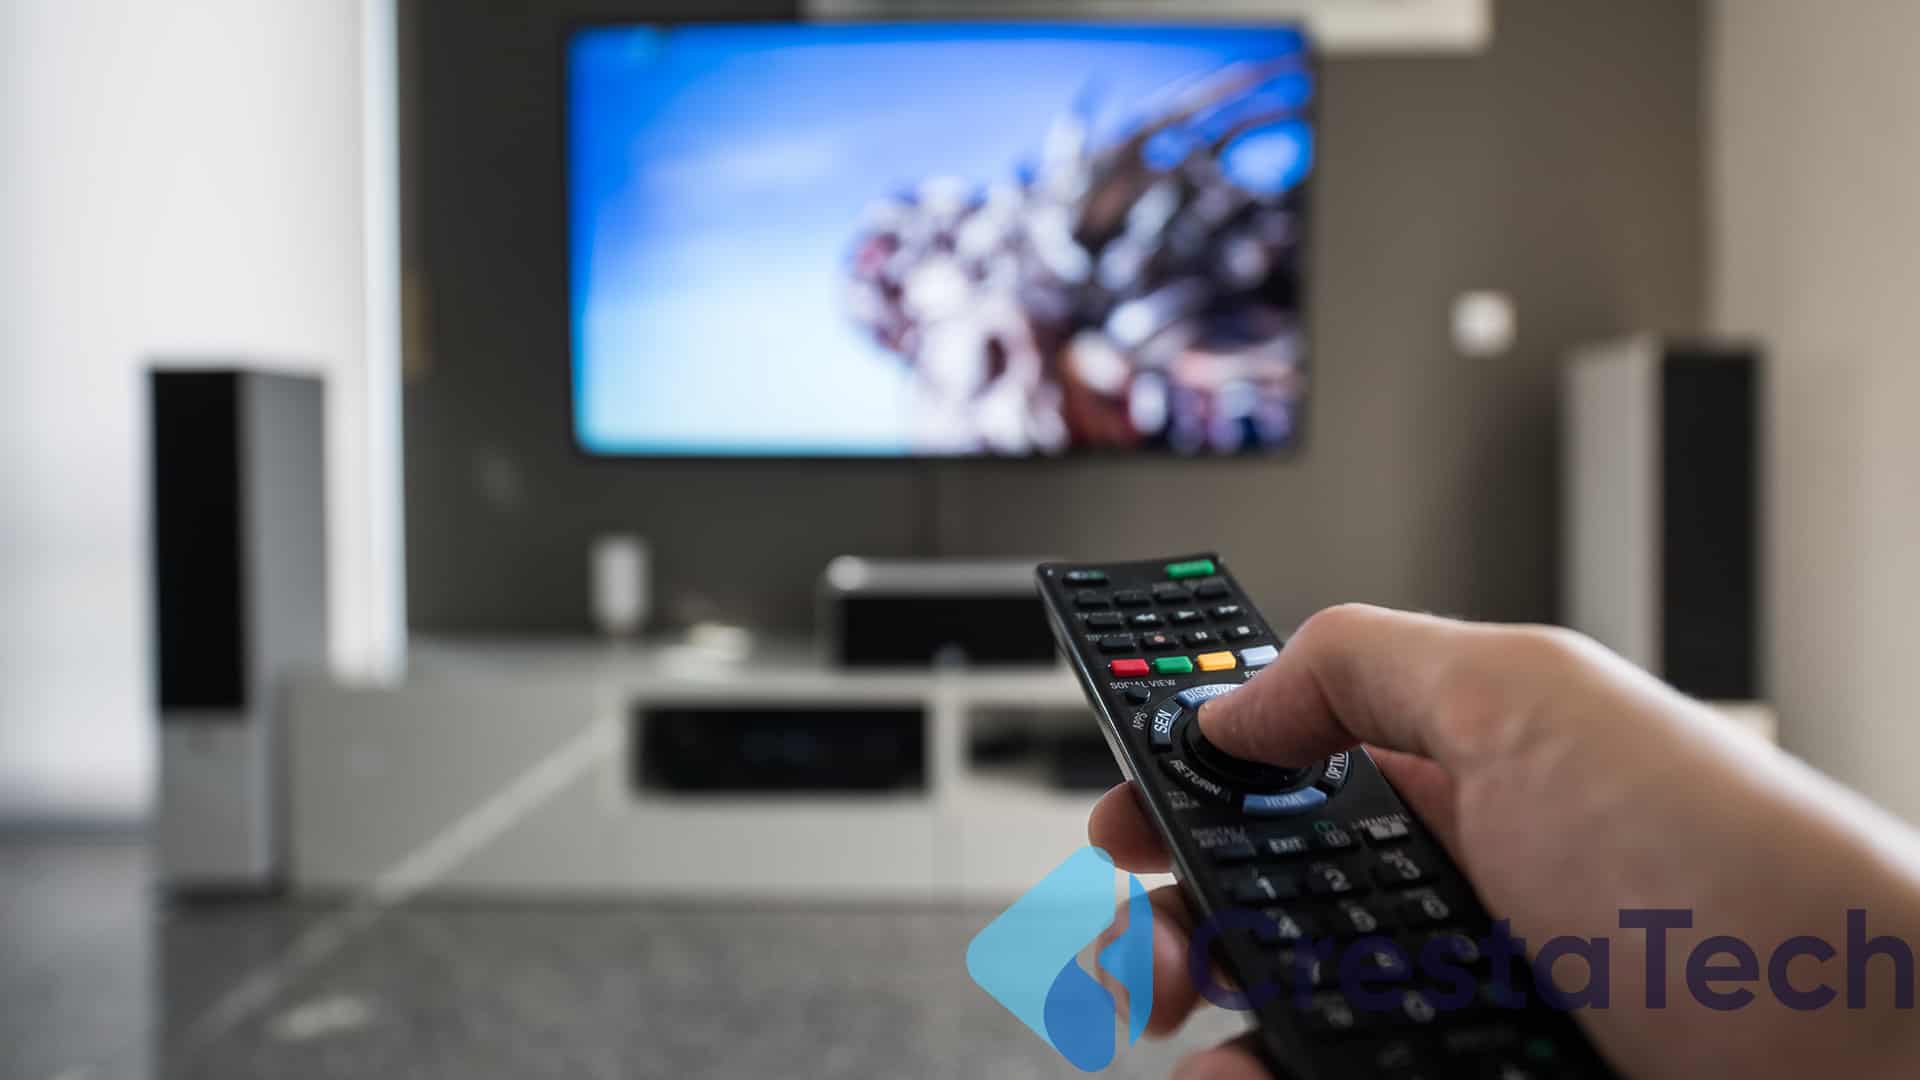 Reconnect your remote to the television